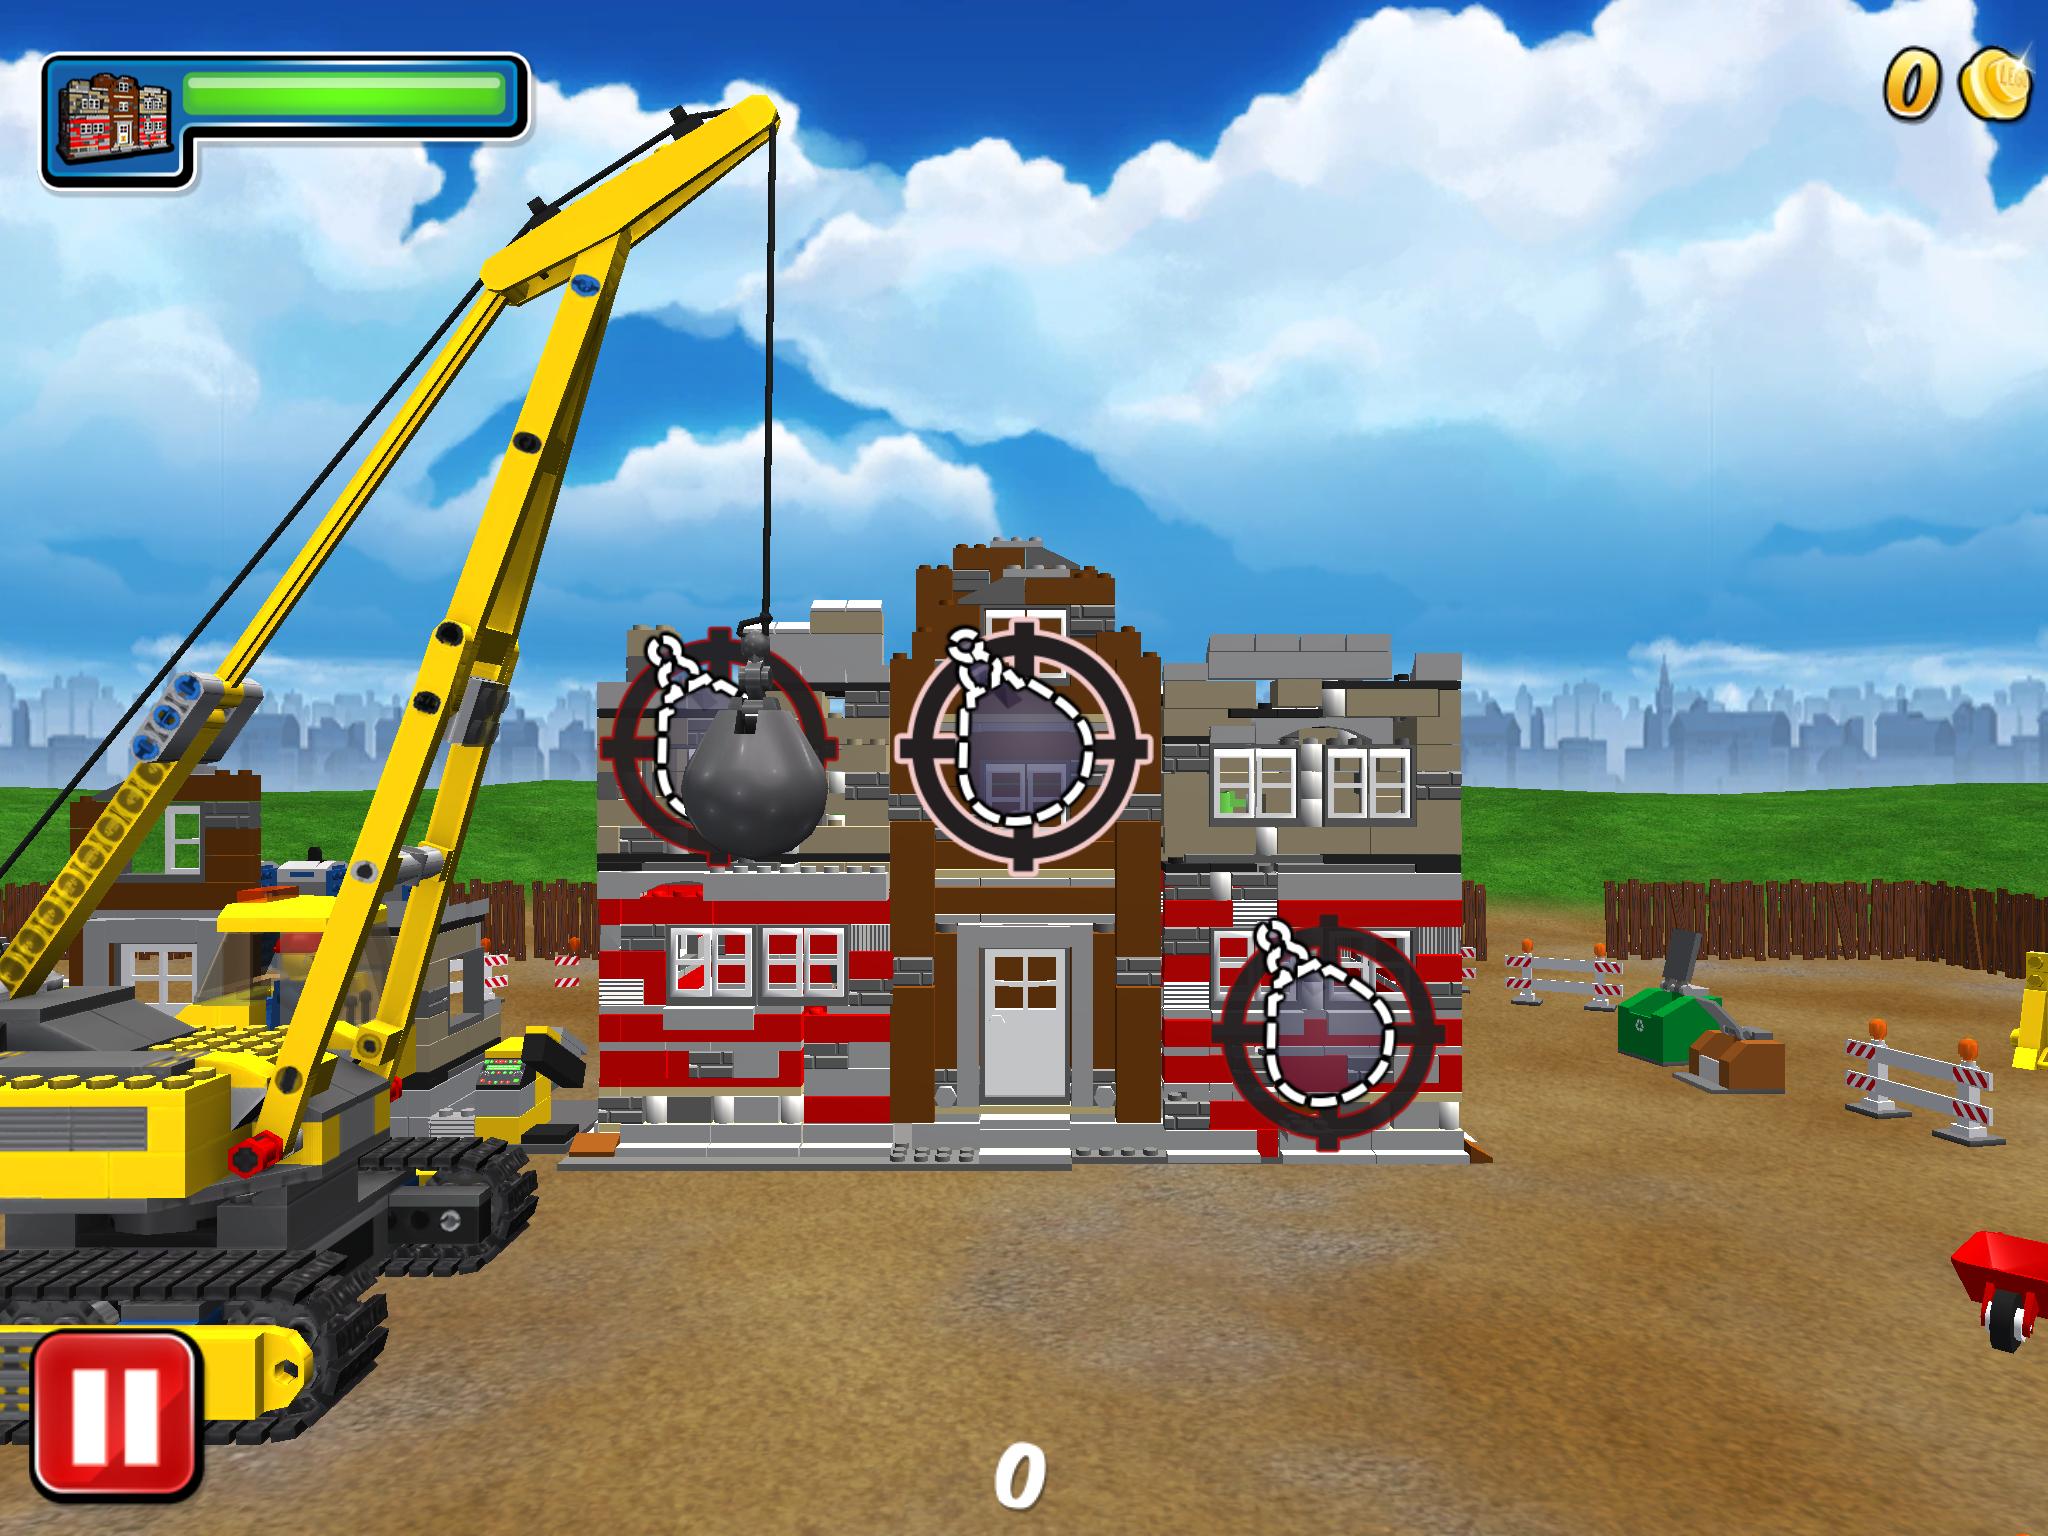 LEGO® City My City for Android - APK Download